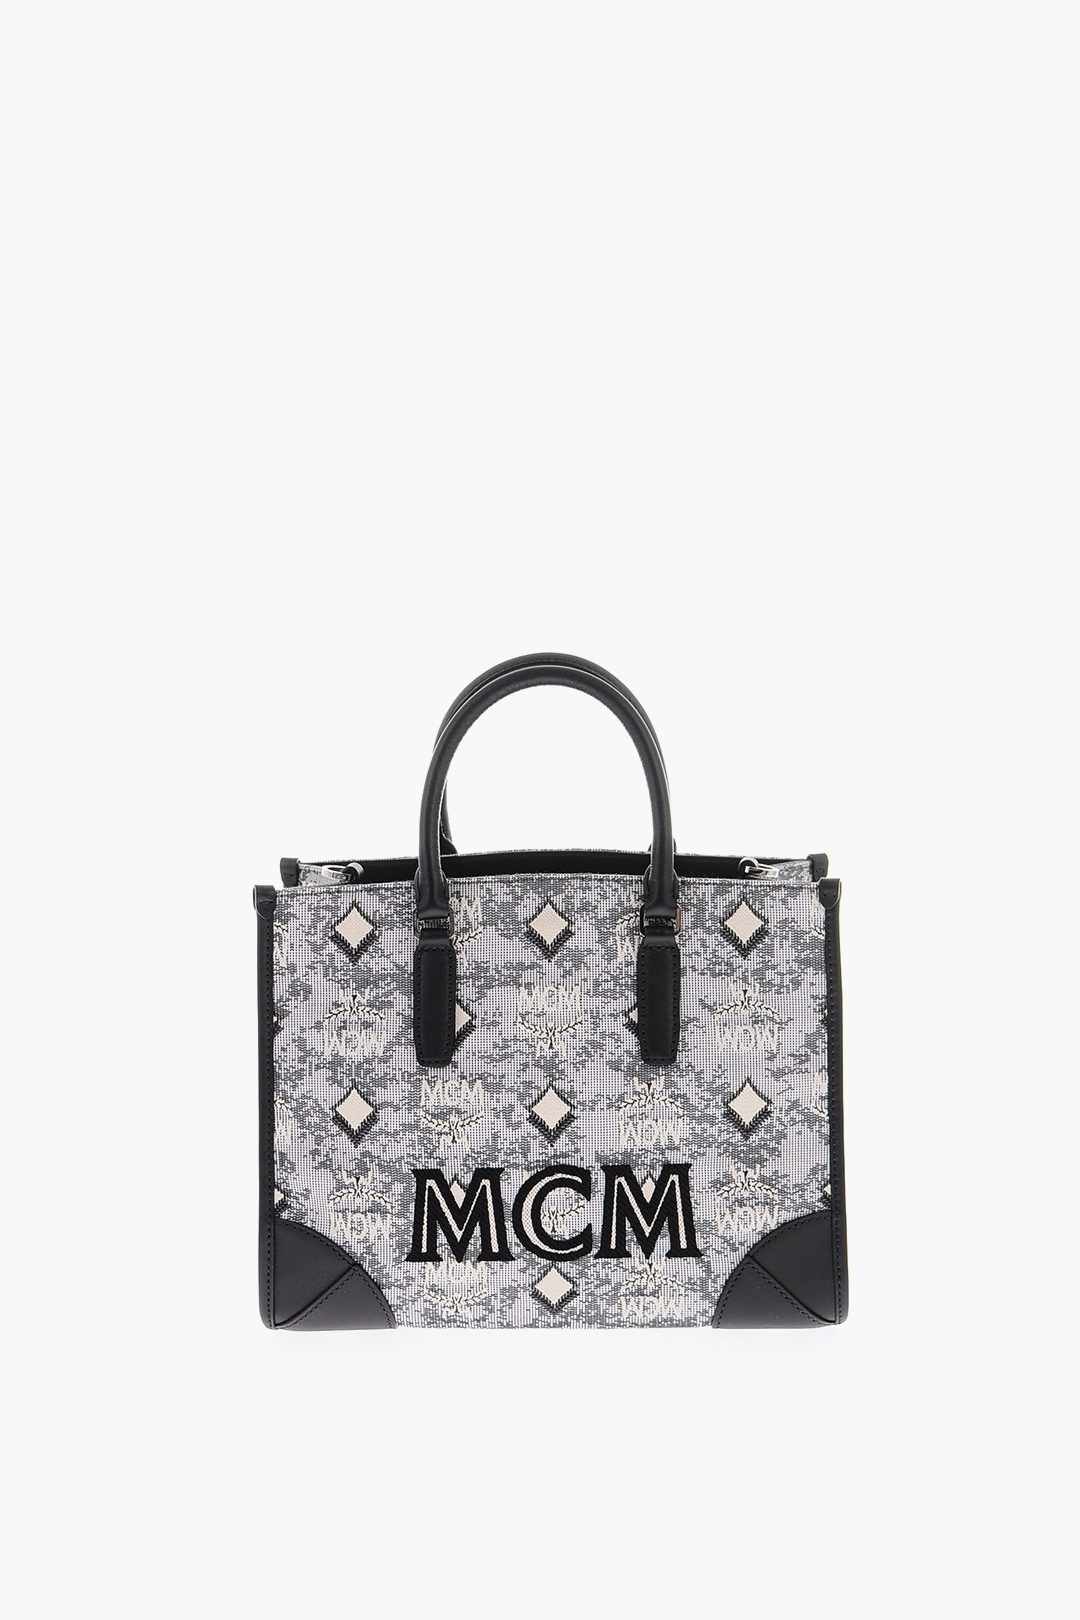 OUTLET 30% Discount Free Shipping Worldwide Mcm Munchen 